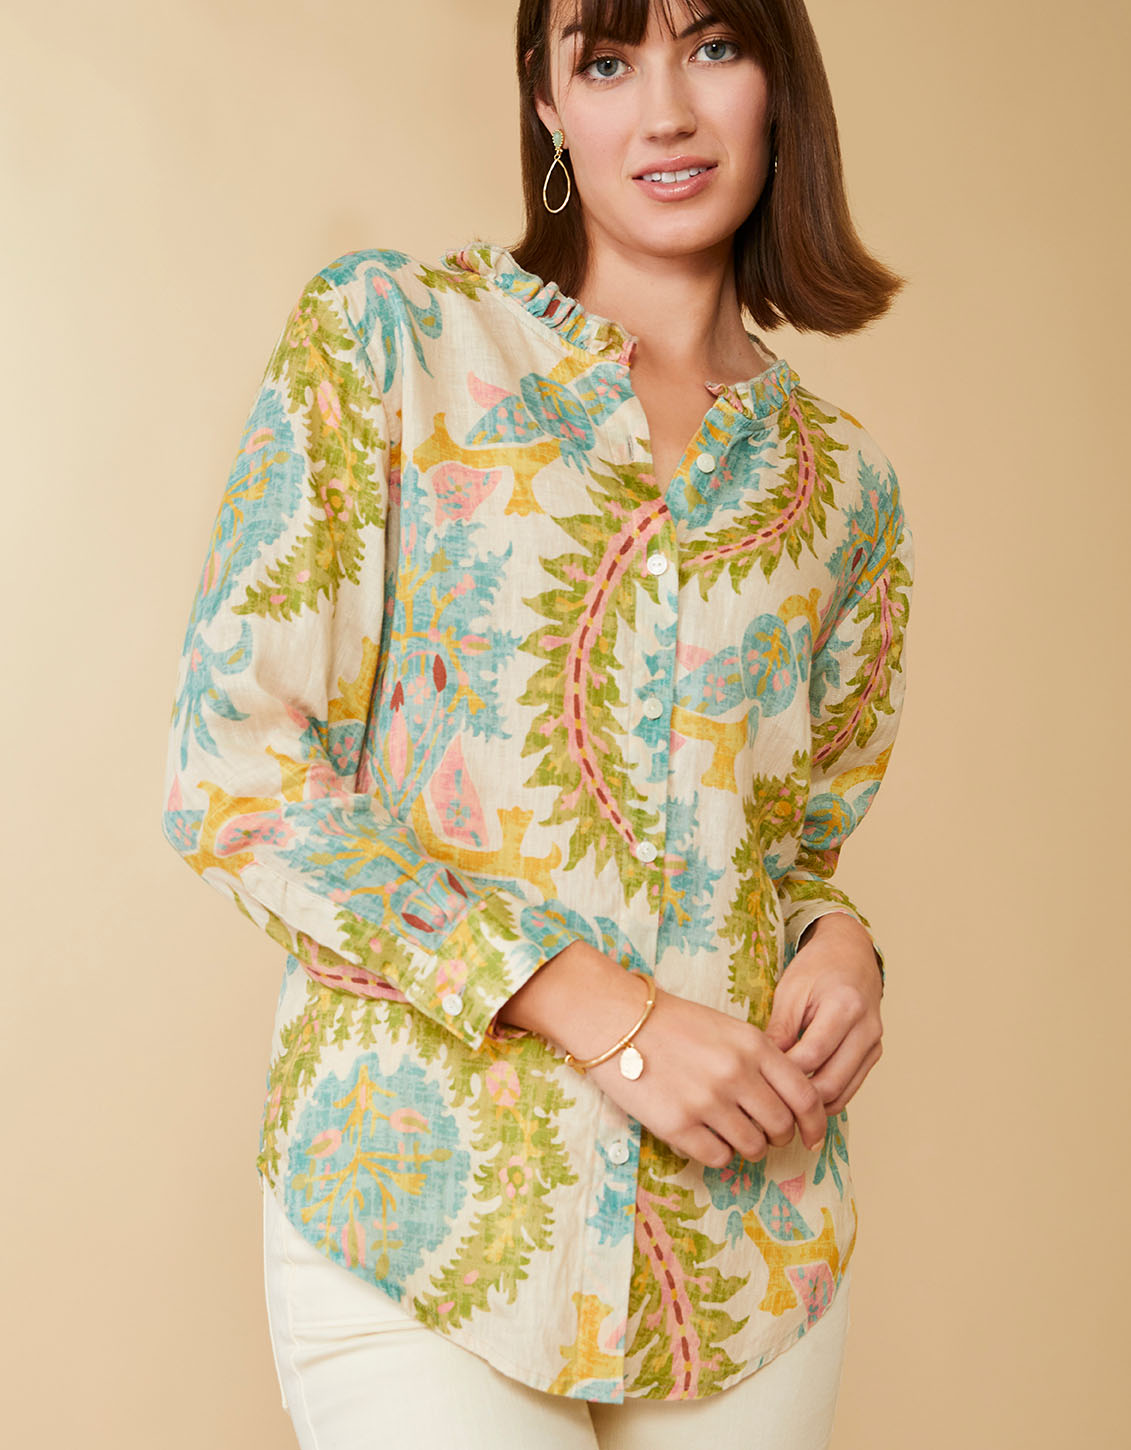 Women's Tops: Shirts, Blouses & More